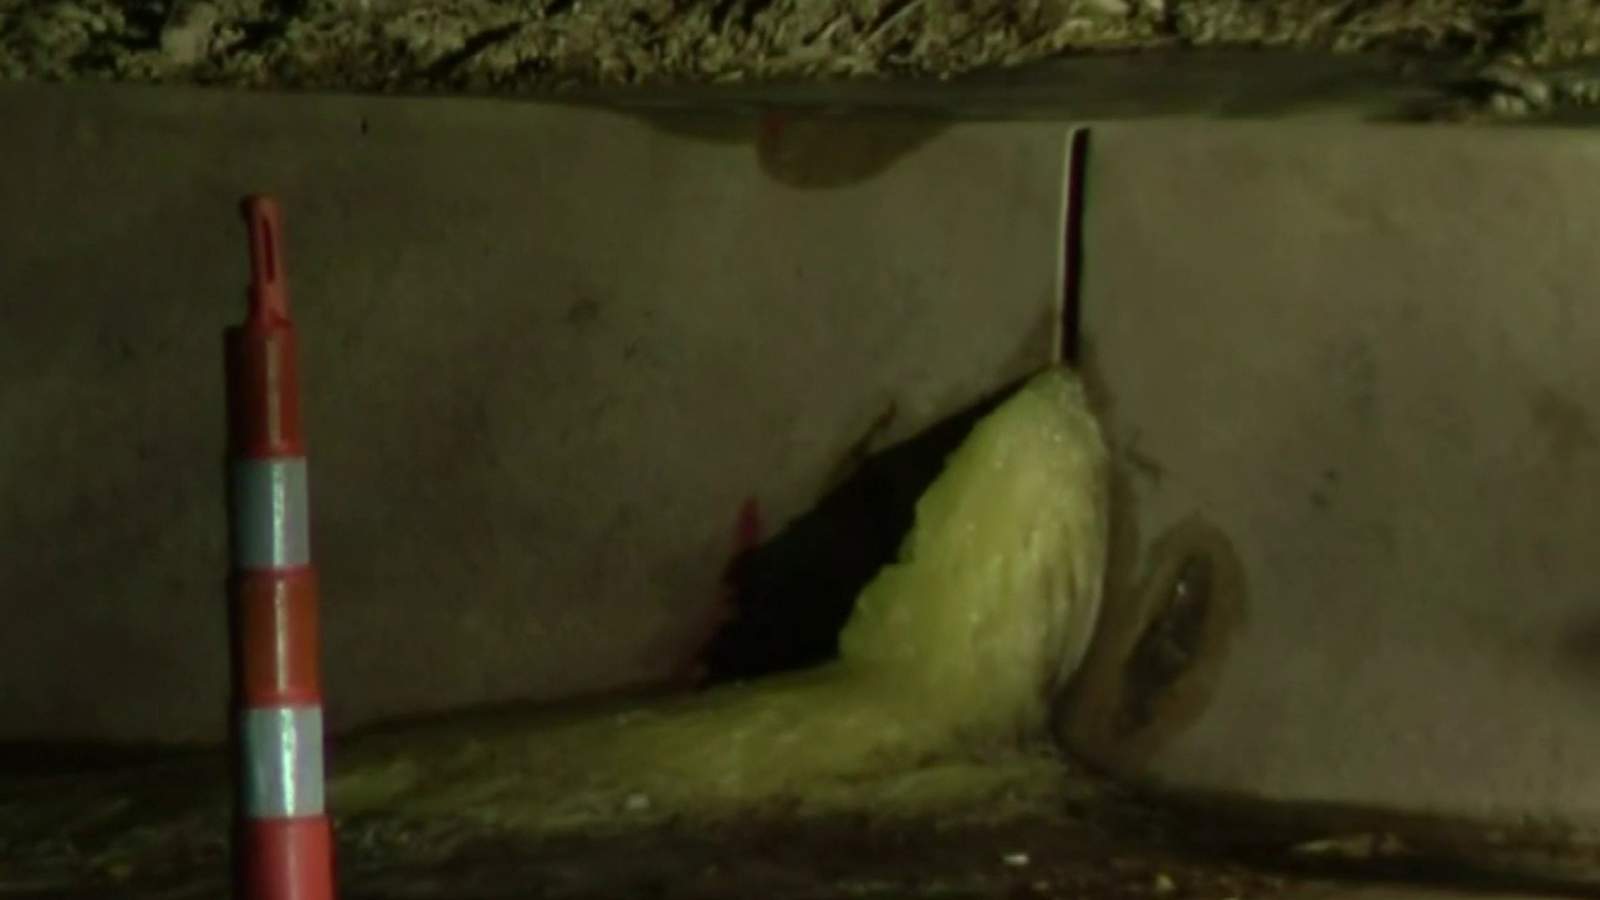 Discovery of green substance on I-696 leads to multi-county contamination investigation